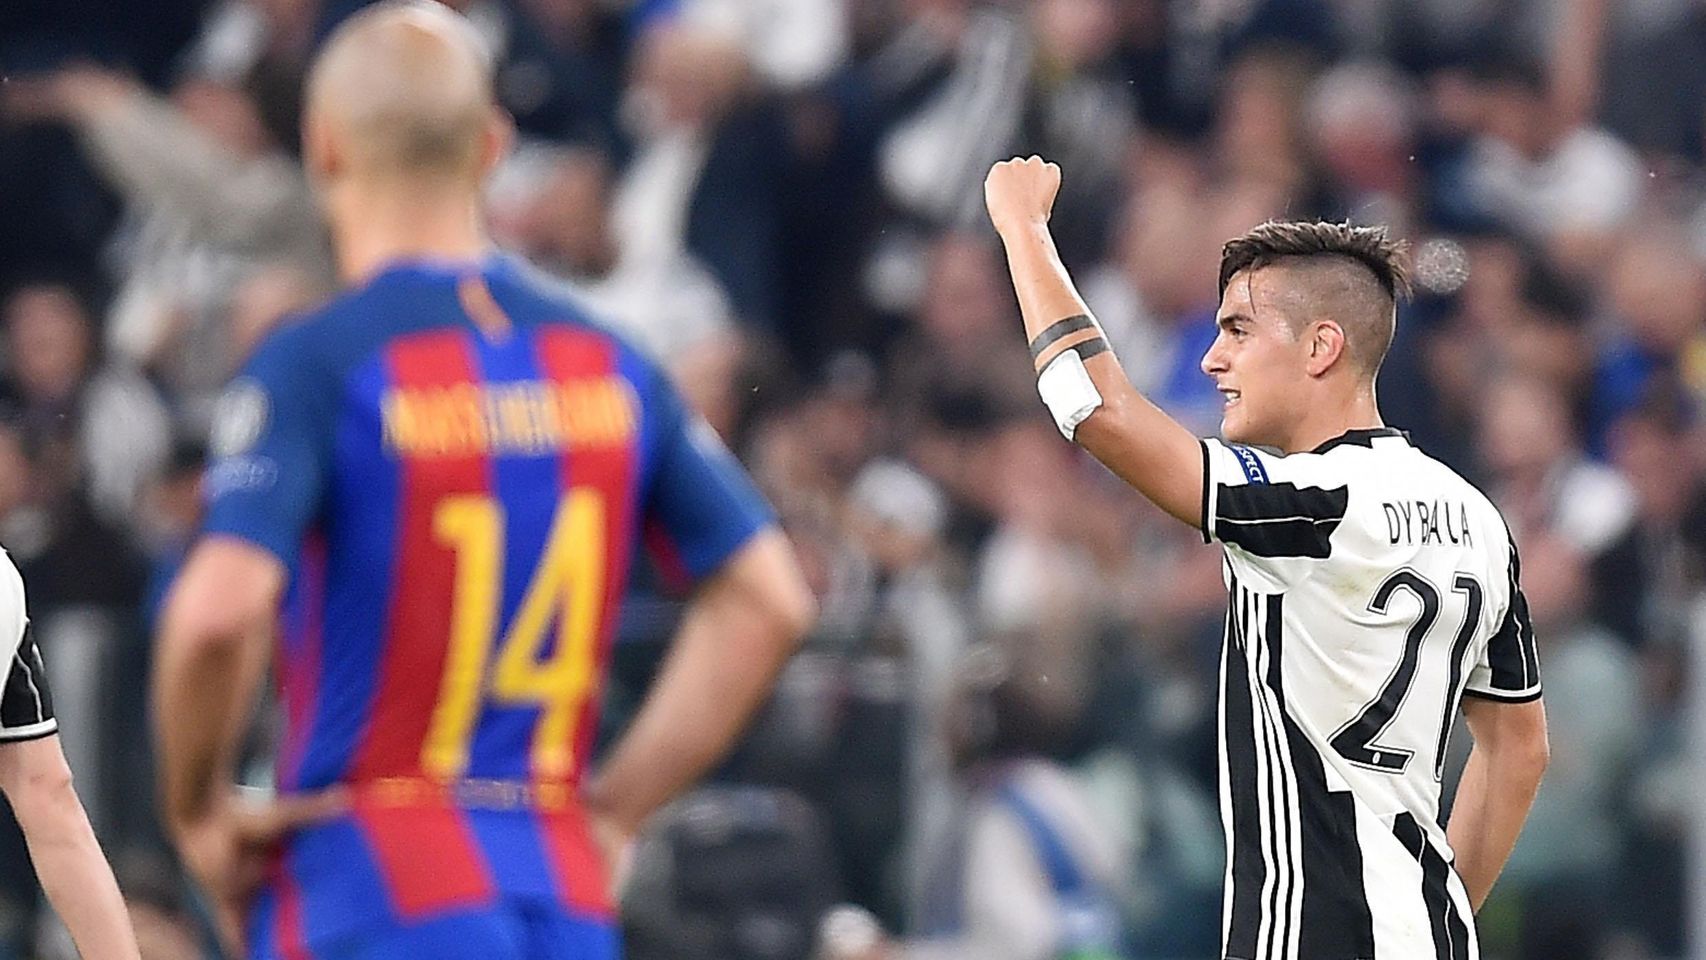 Dybala celebrates after scoring against Barcelona. (Photo via Getty Images)